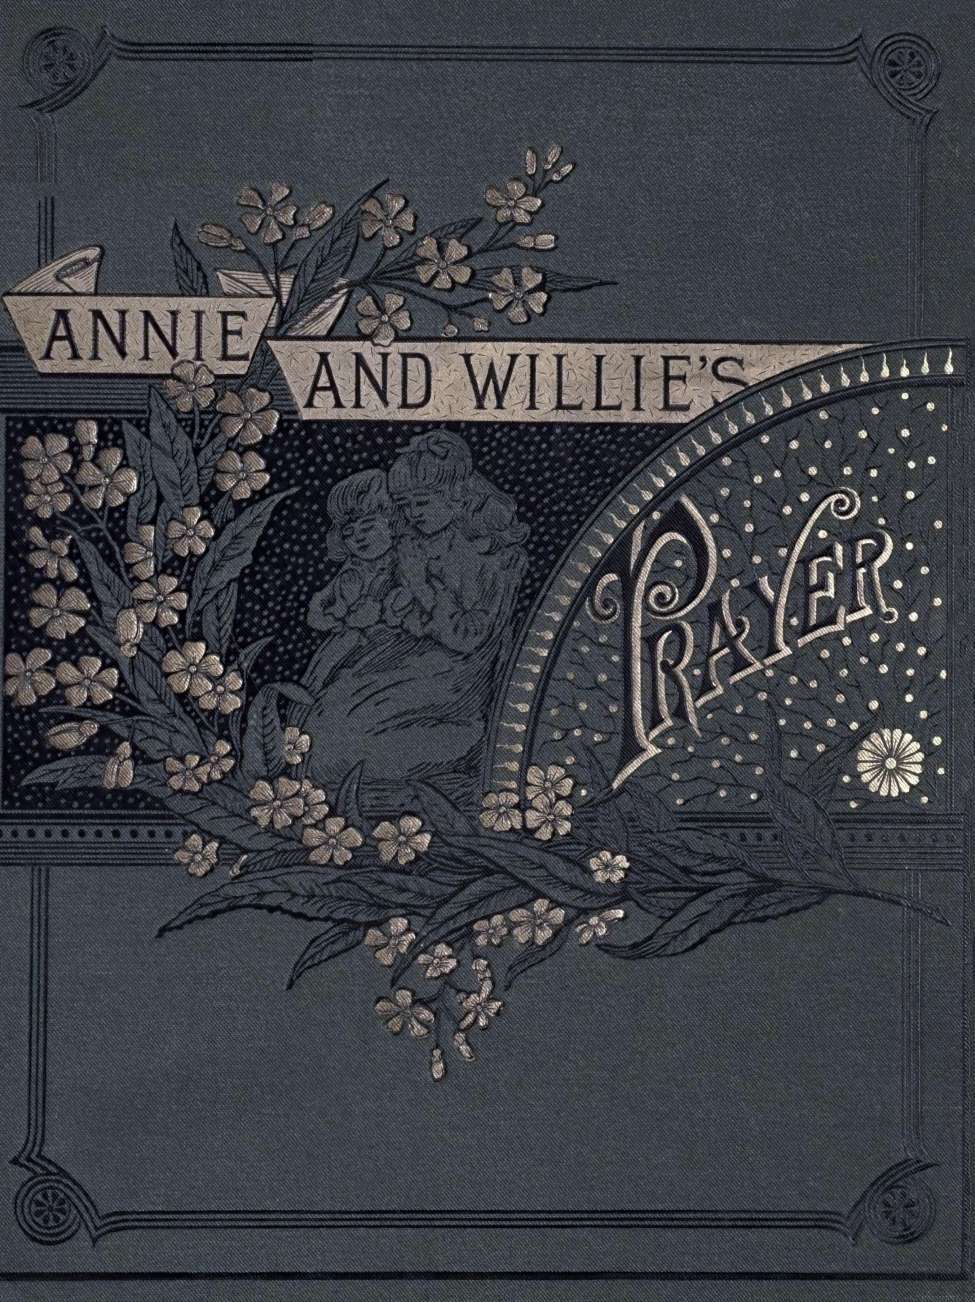 Comic Book Cover For Annie and Willie's Prayer